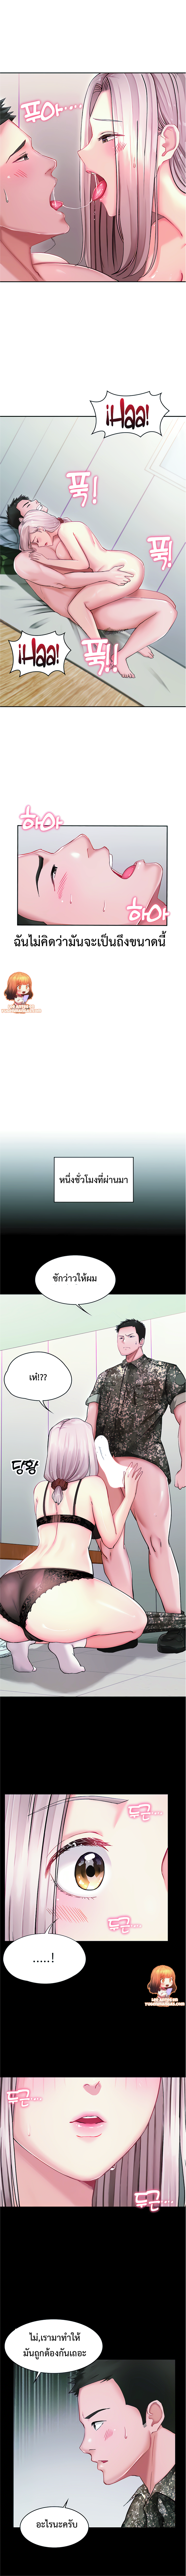 The Commander’s Daughter 6 (5)